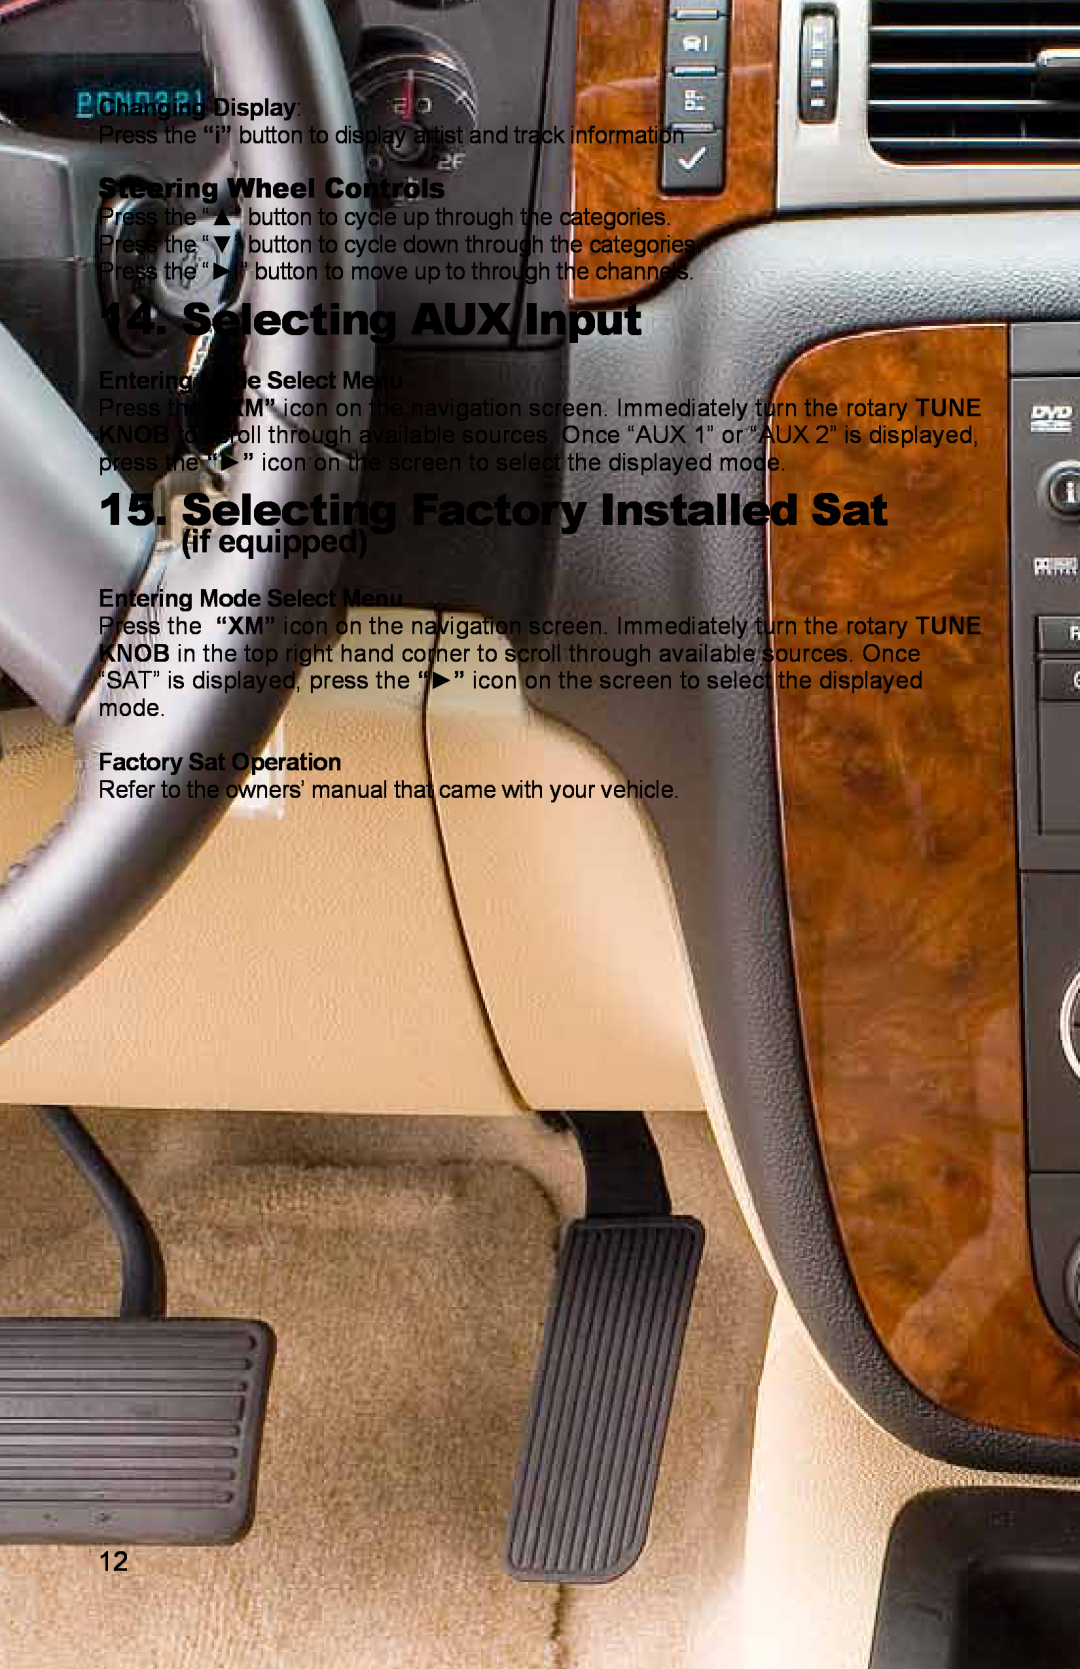 iSimple PGHGM1, PXAMG Selecting AUX Input, Selecting Factory Installed Sat, if equipped, Steering Wheel Controls 